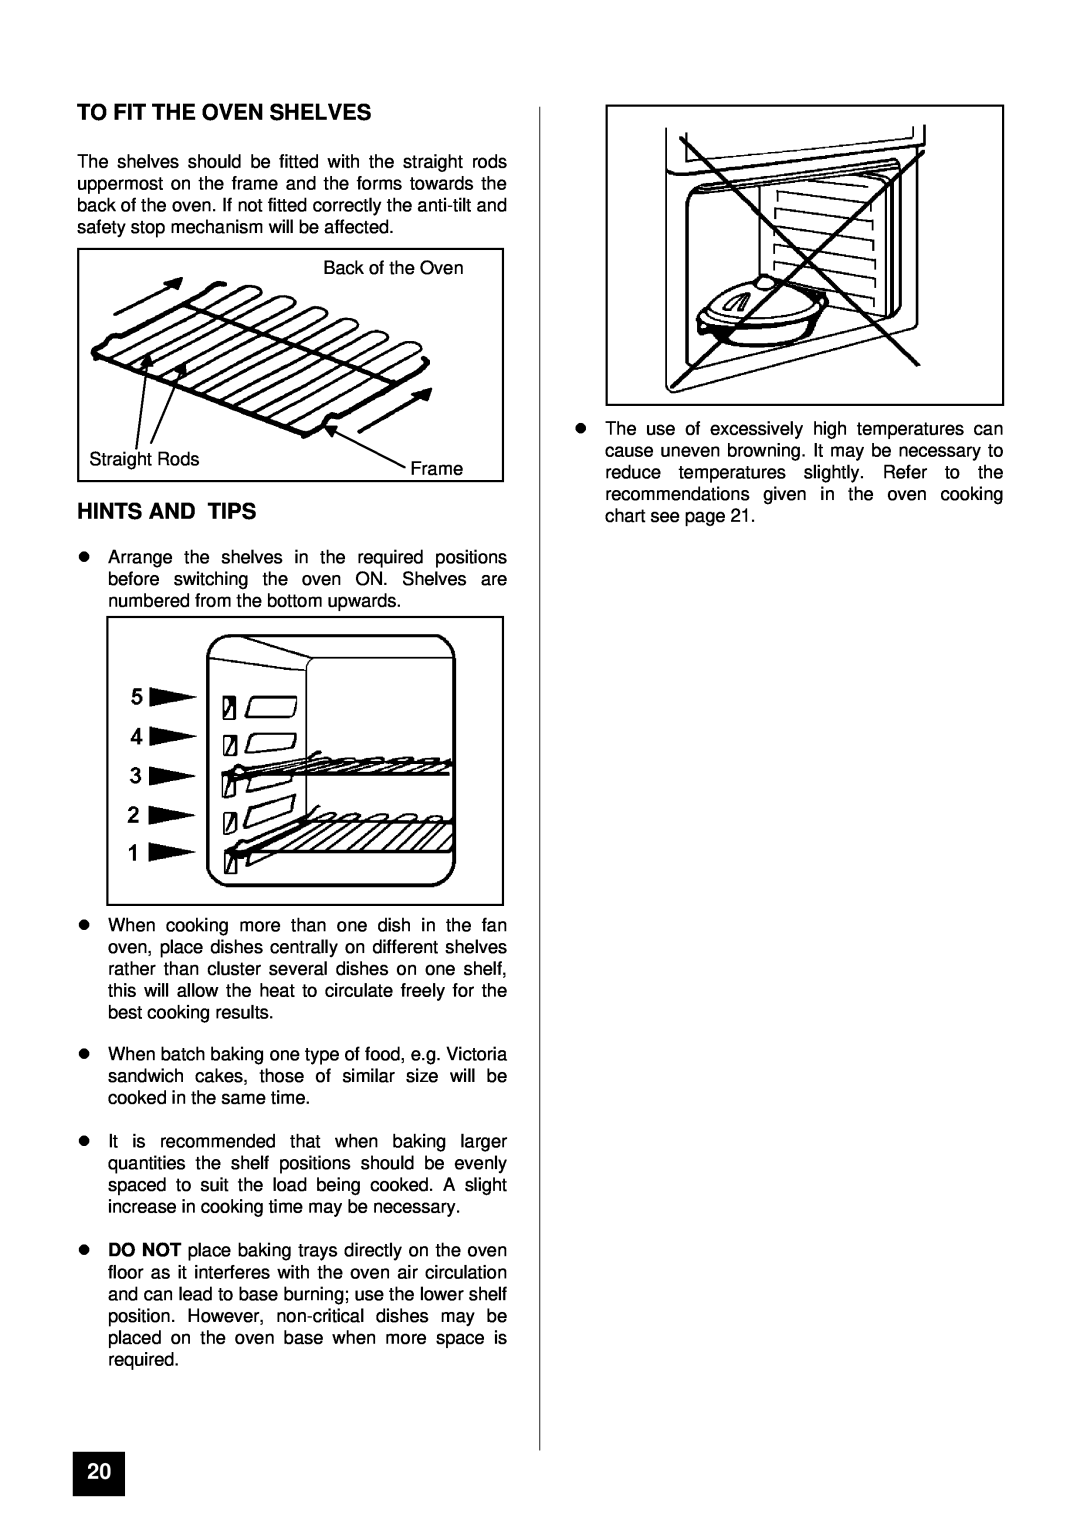 Tricity Bendix BS 600 installation instructions To Fit The Oven Shelves, lHINTS AND TIPS 